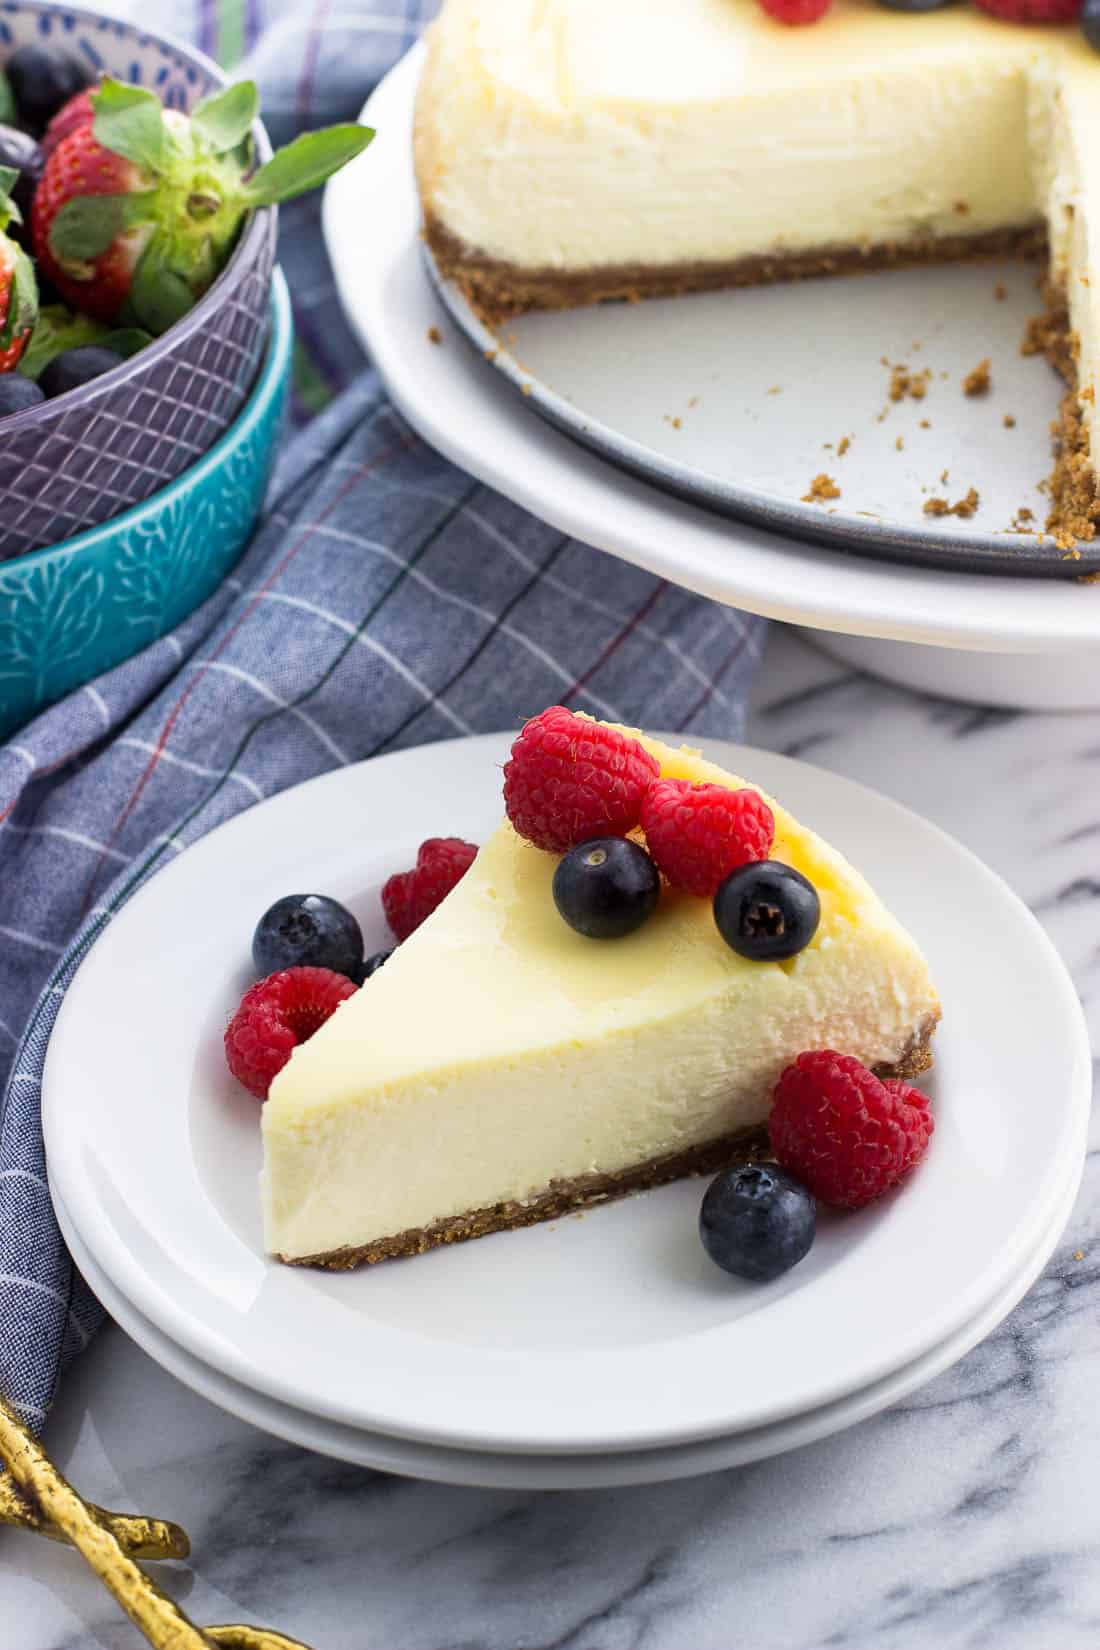 Sour cream cheesecake garnished with berries on a plate next to more fresh fruit